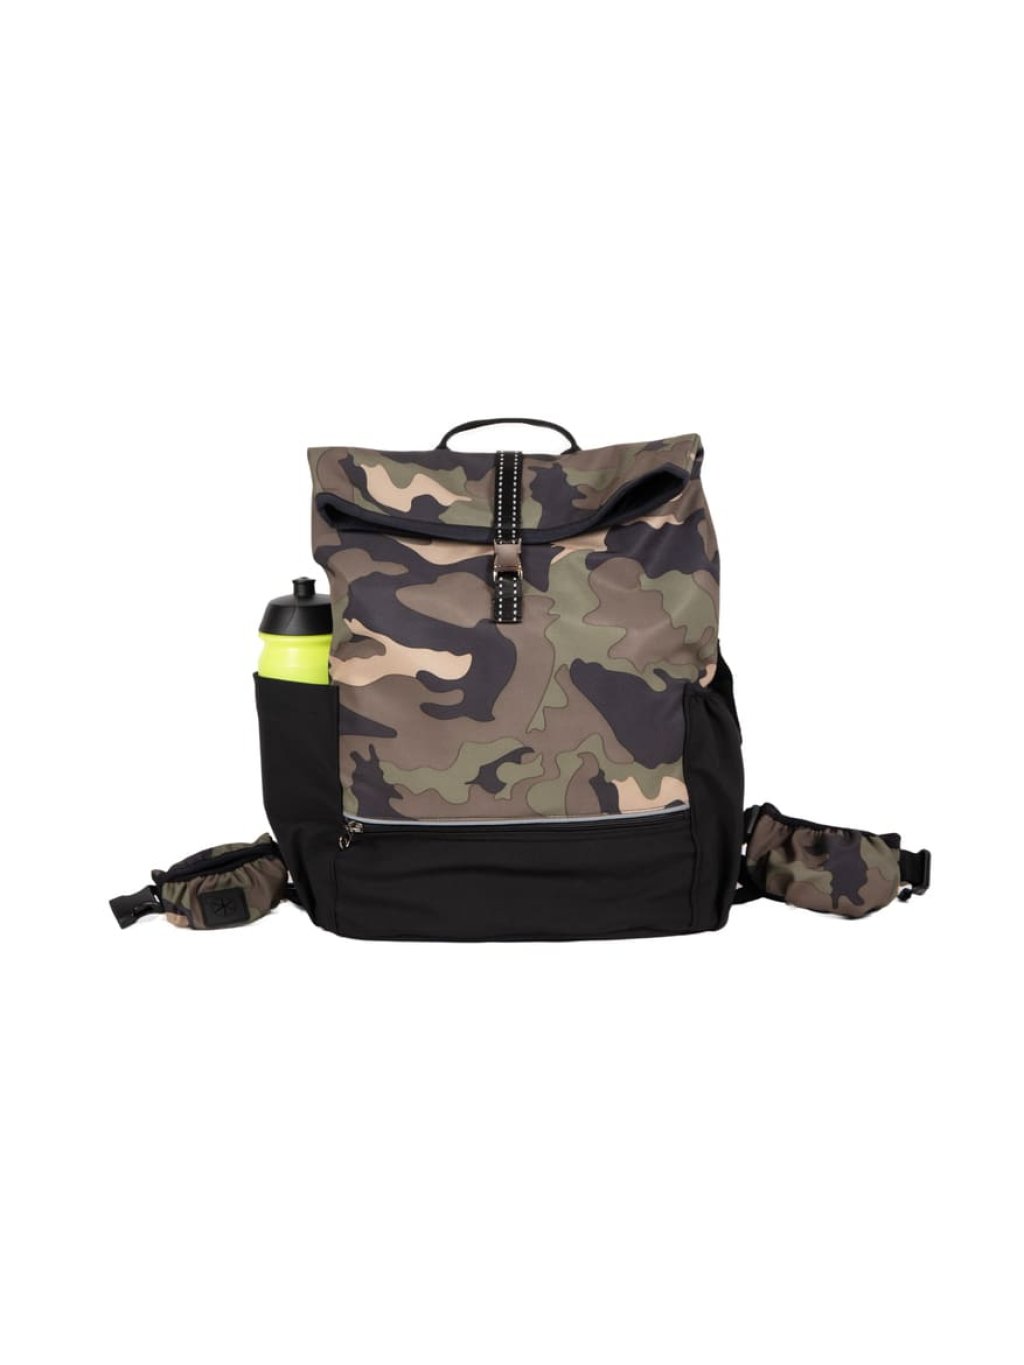 Ttraining backpack CAMOUFLAGE